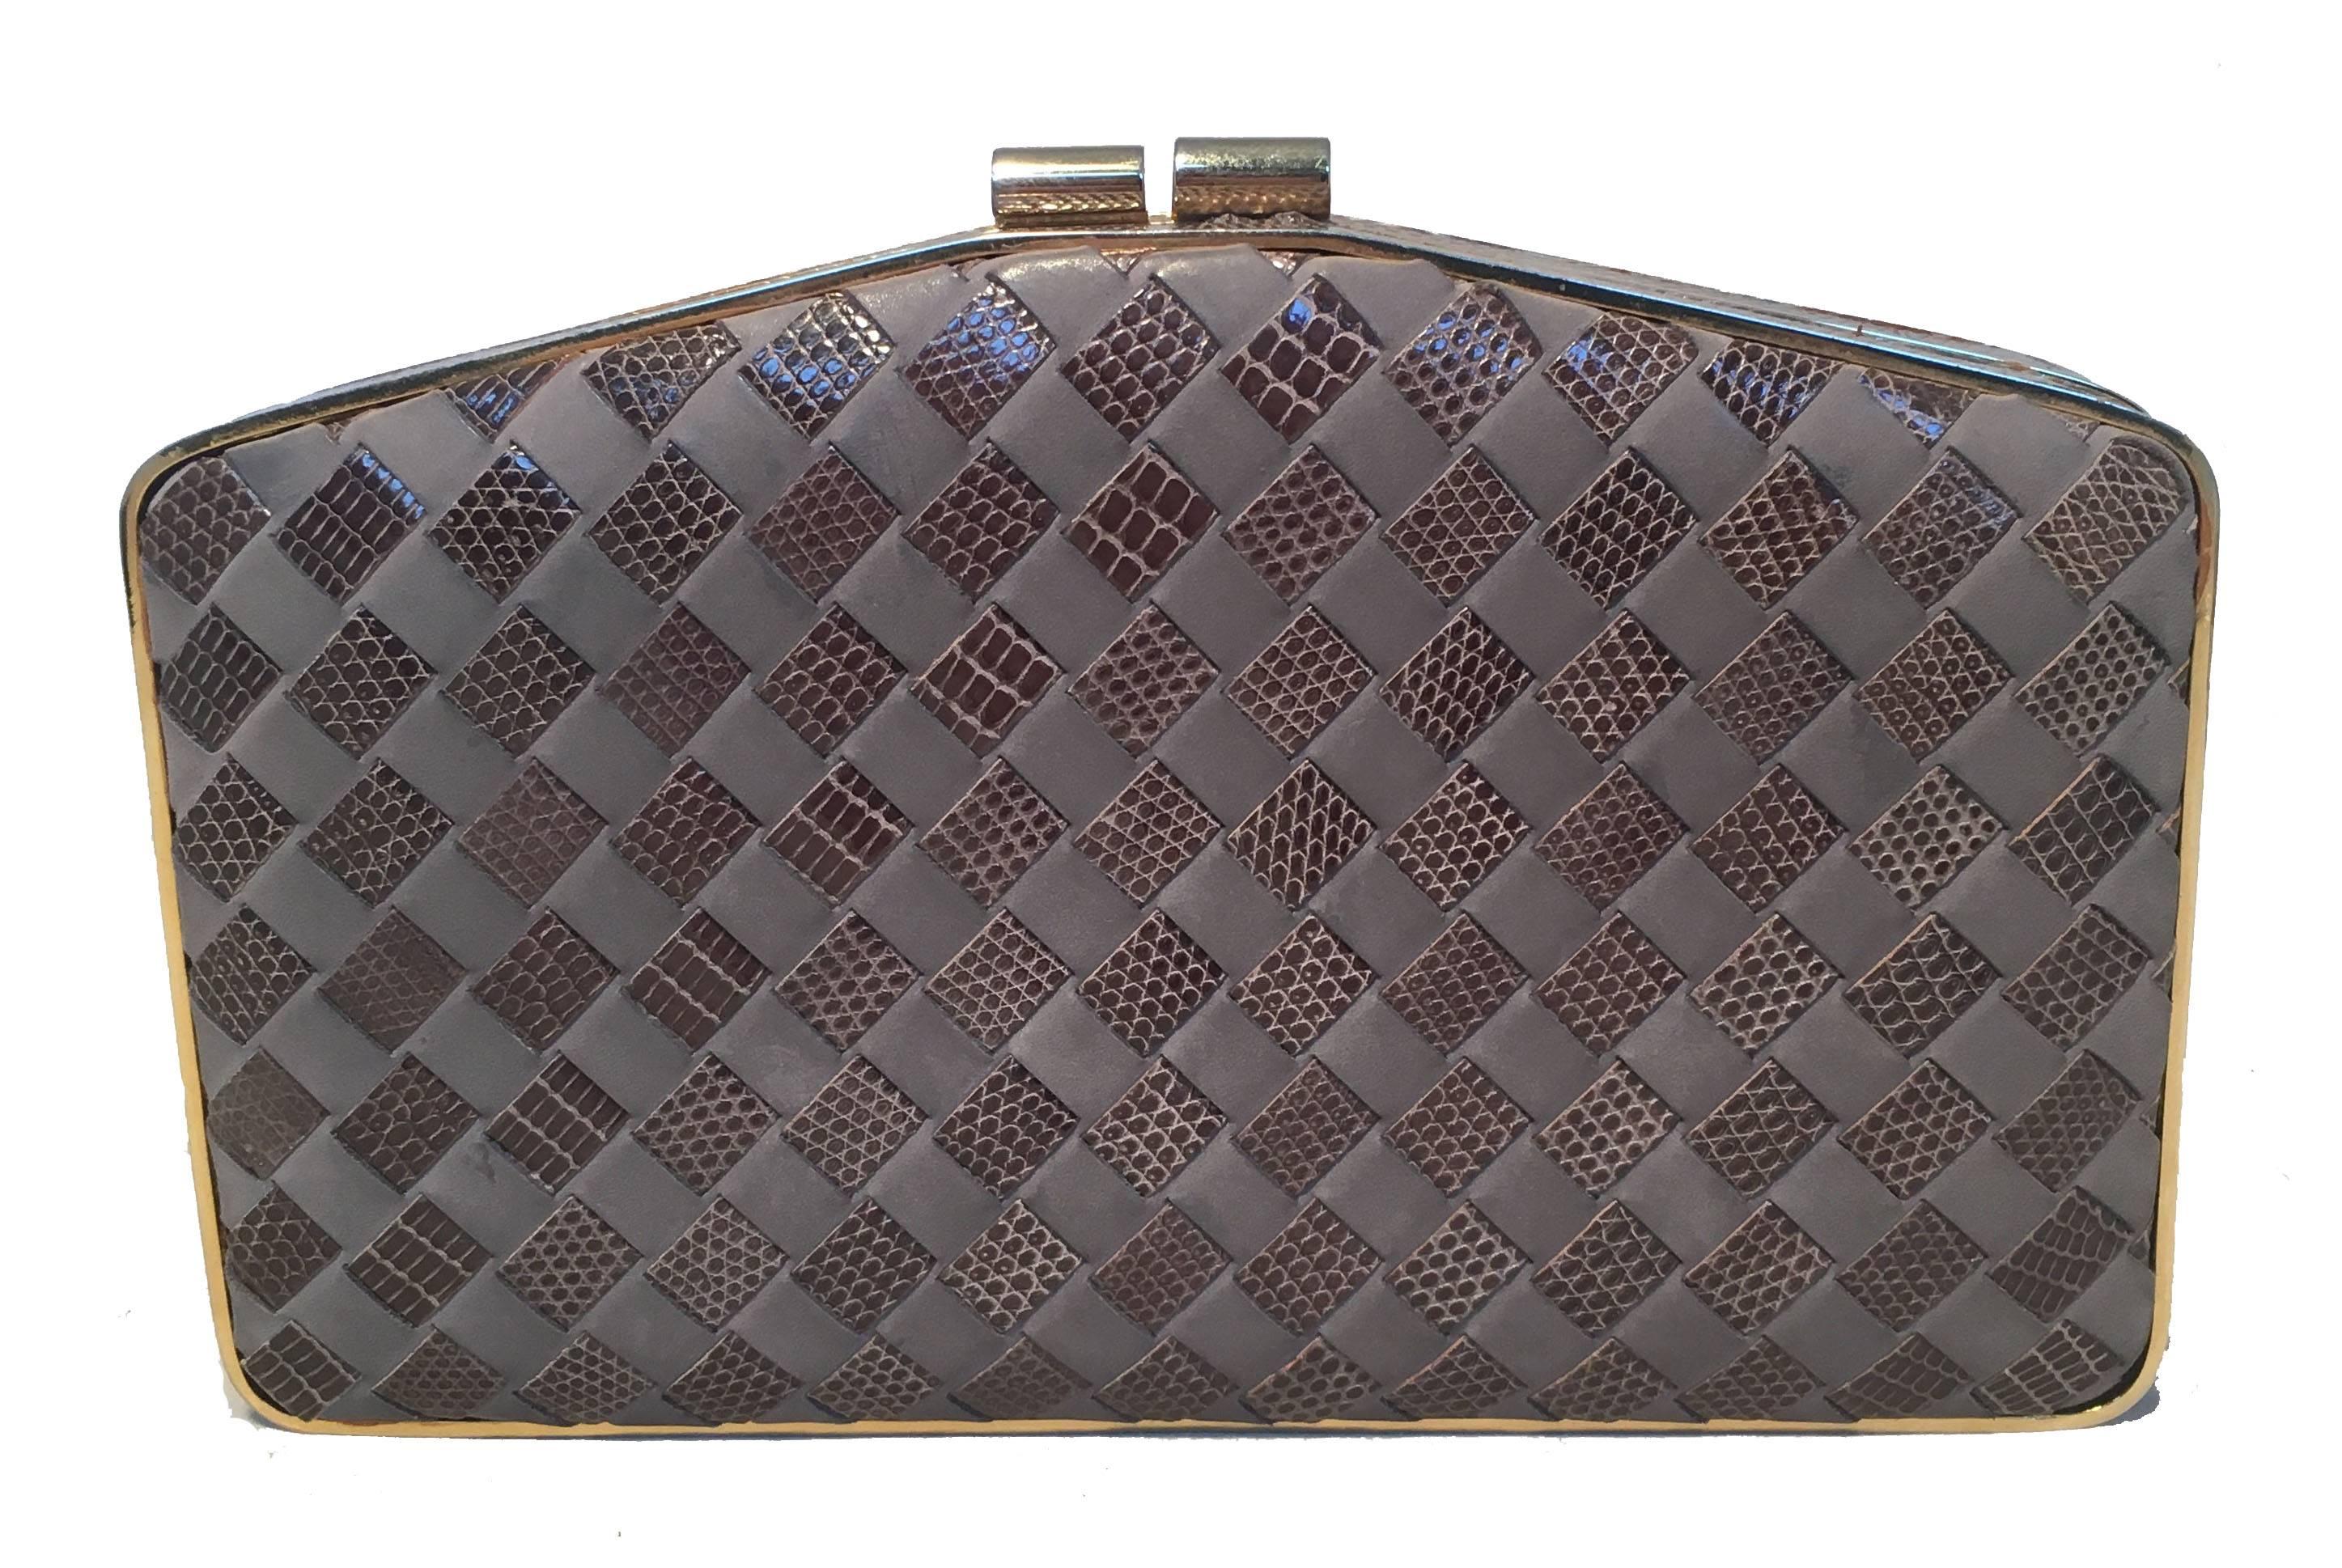 AMAZING Vintage Bottega Veneta lizard and leather woven clutch in very good condition.  Signature woven pattern designed exterior with lizard skin and grey leather trimmed with gold hardware. Top kiss lock style closure opens to a grey silk lined